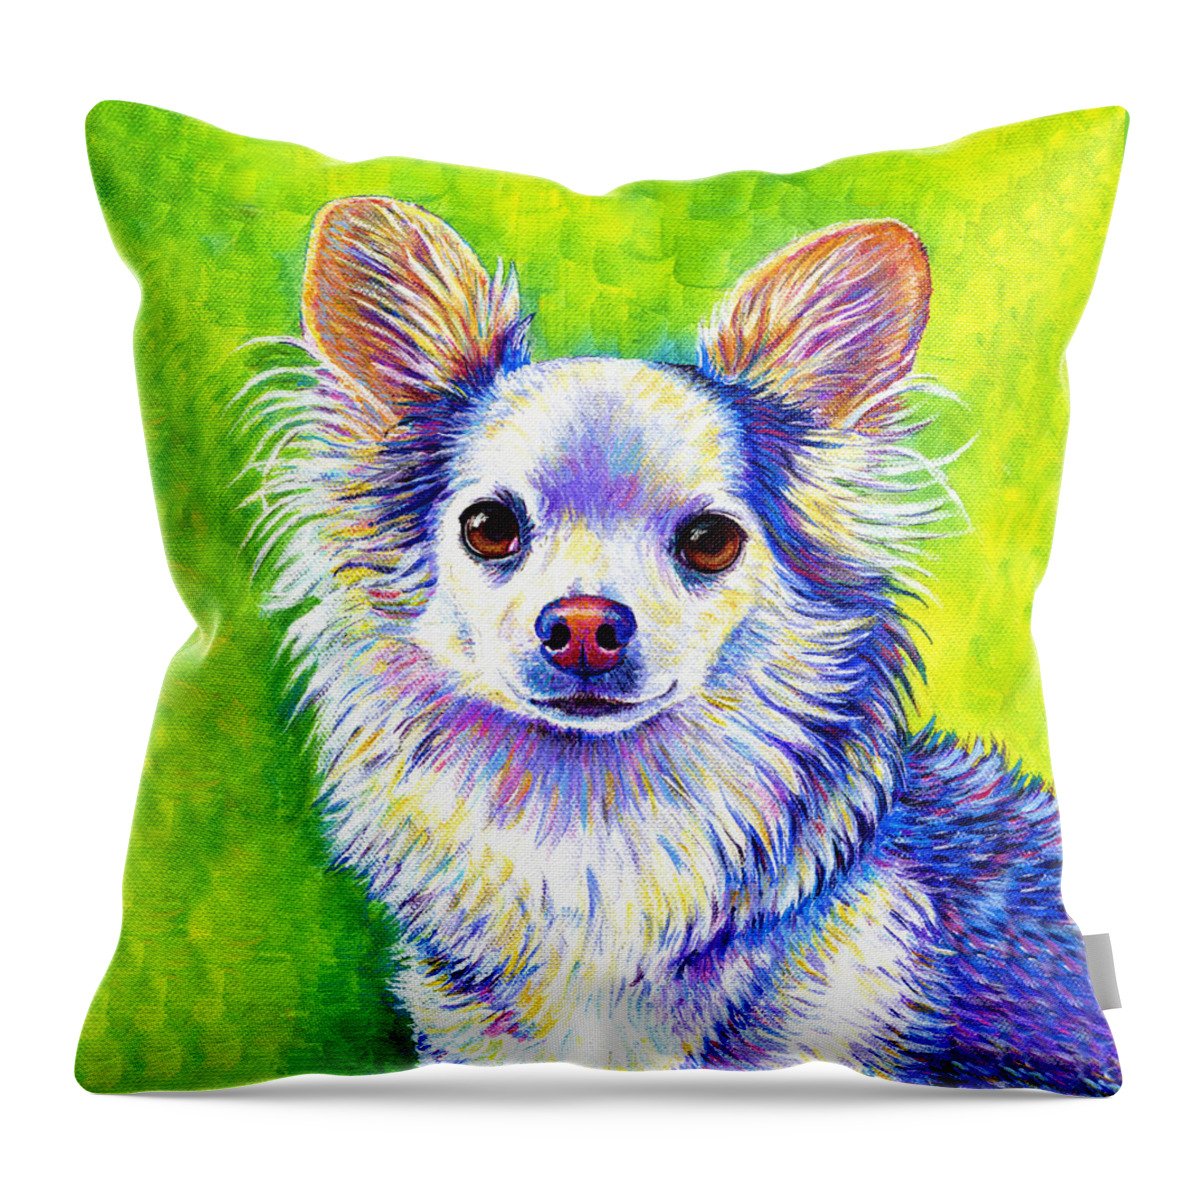 Chihuahua Throw Pillow featuring the painting Colorful Cute Longhaired Chihuahua Dog by Rebecca Wang